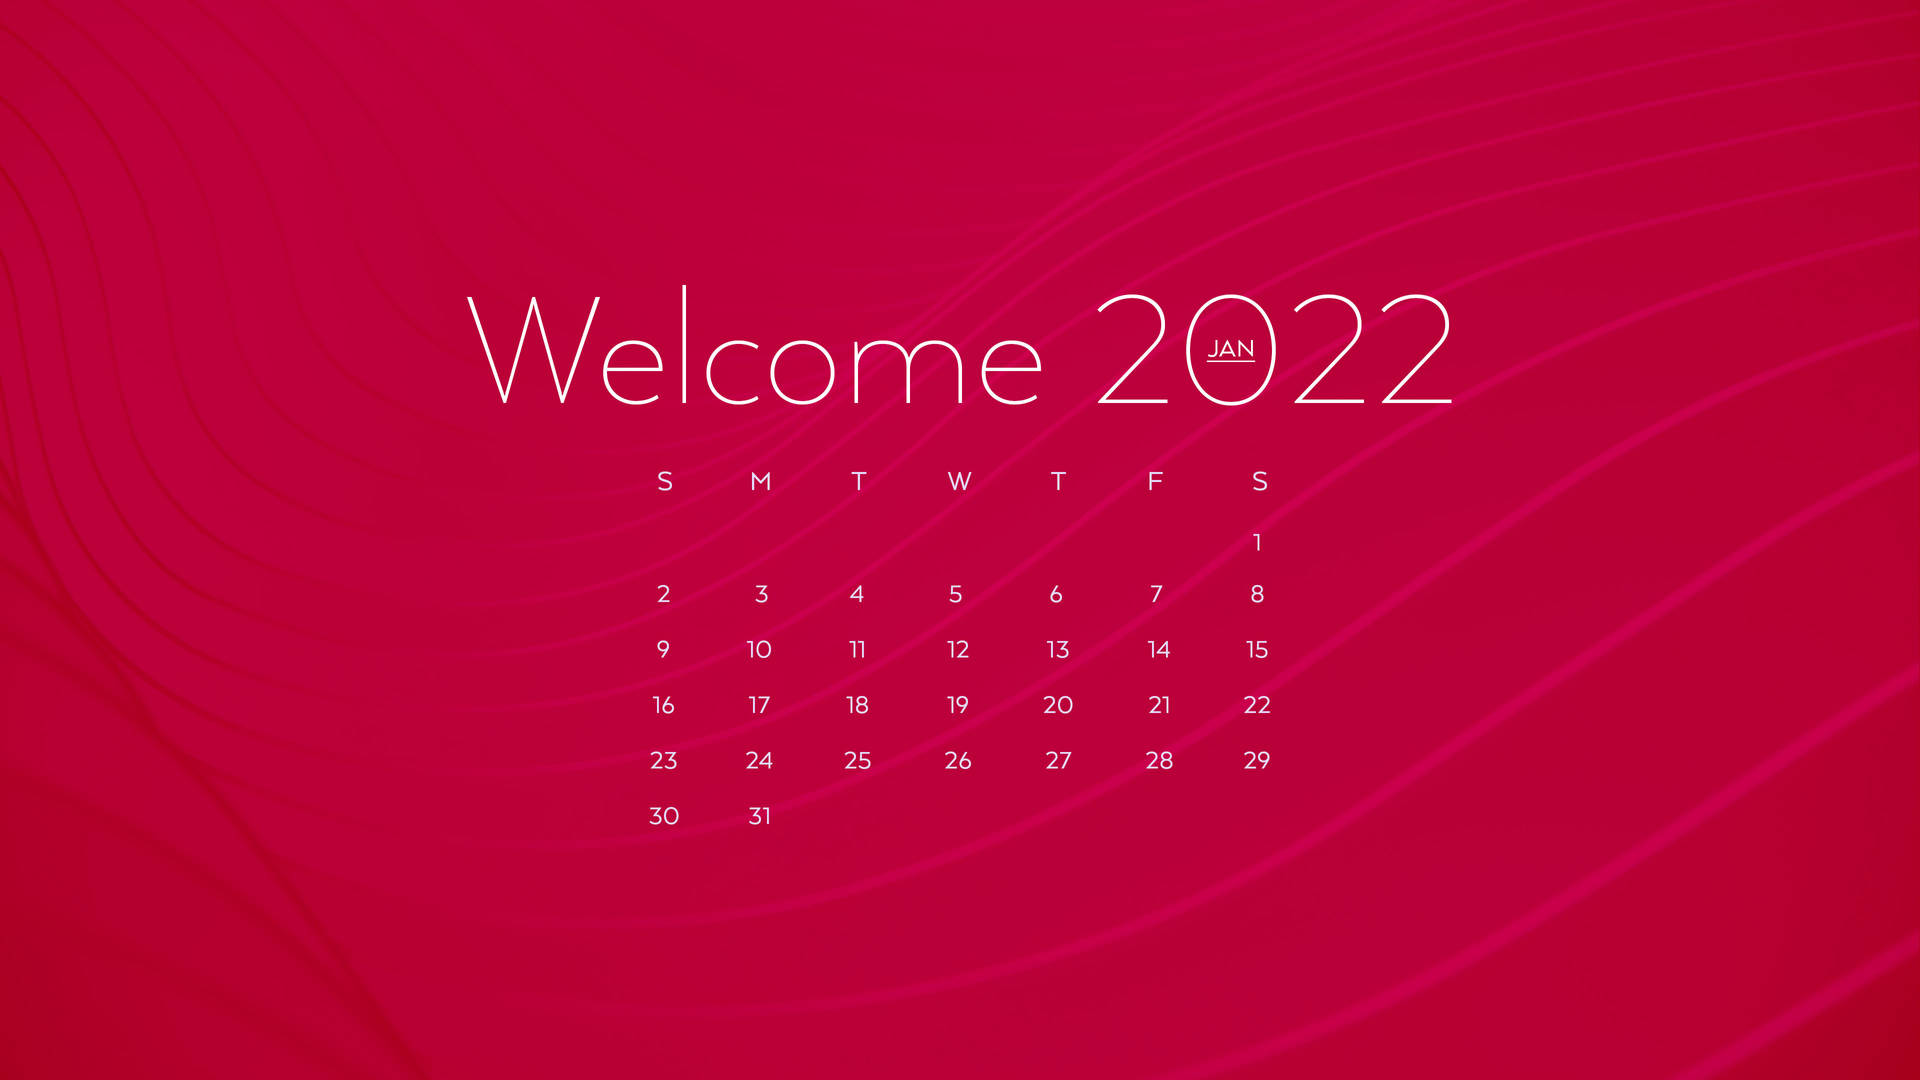 Welcome January 2022 Red Calendar Background